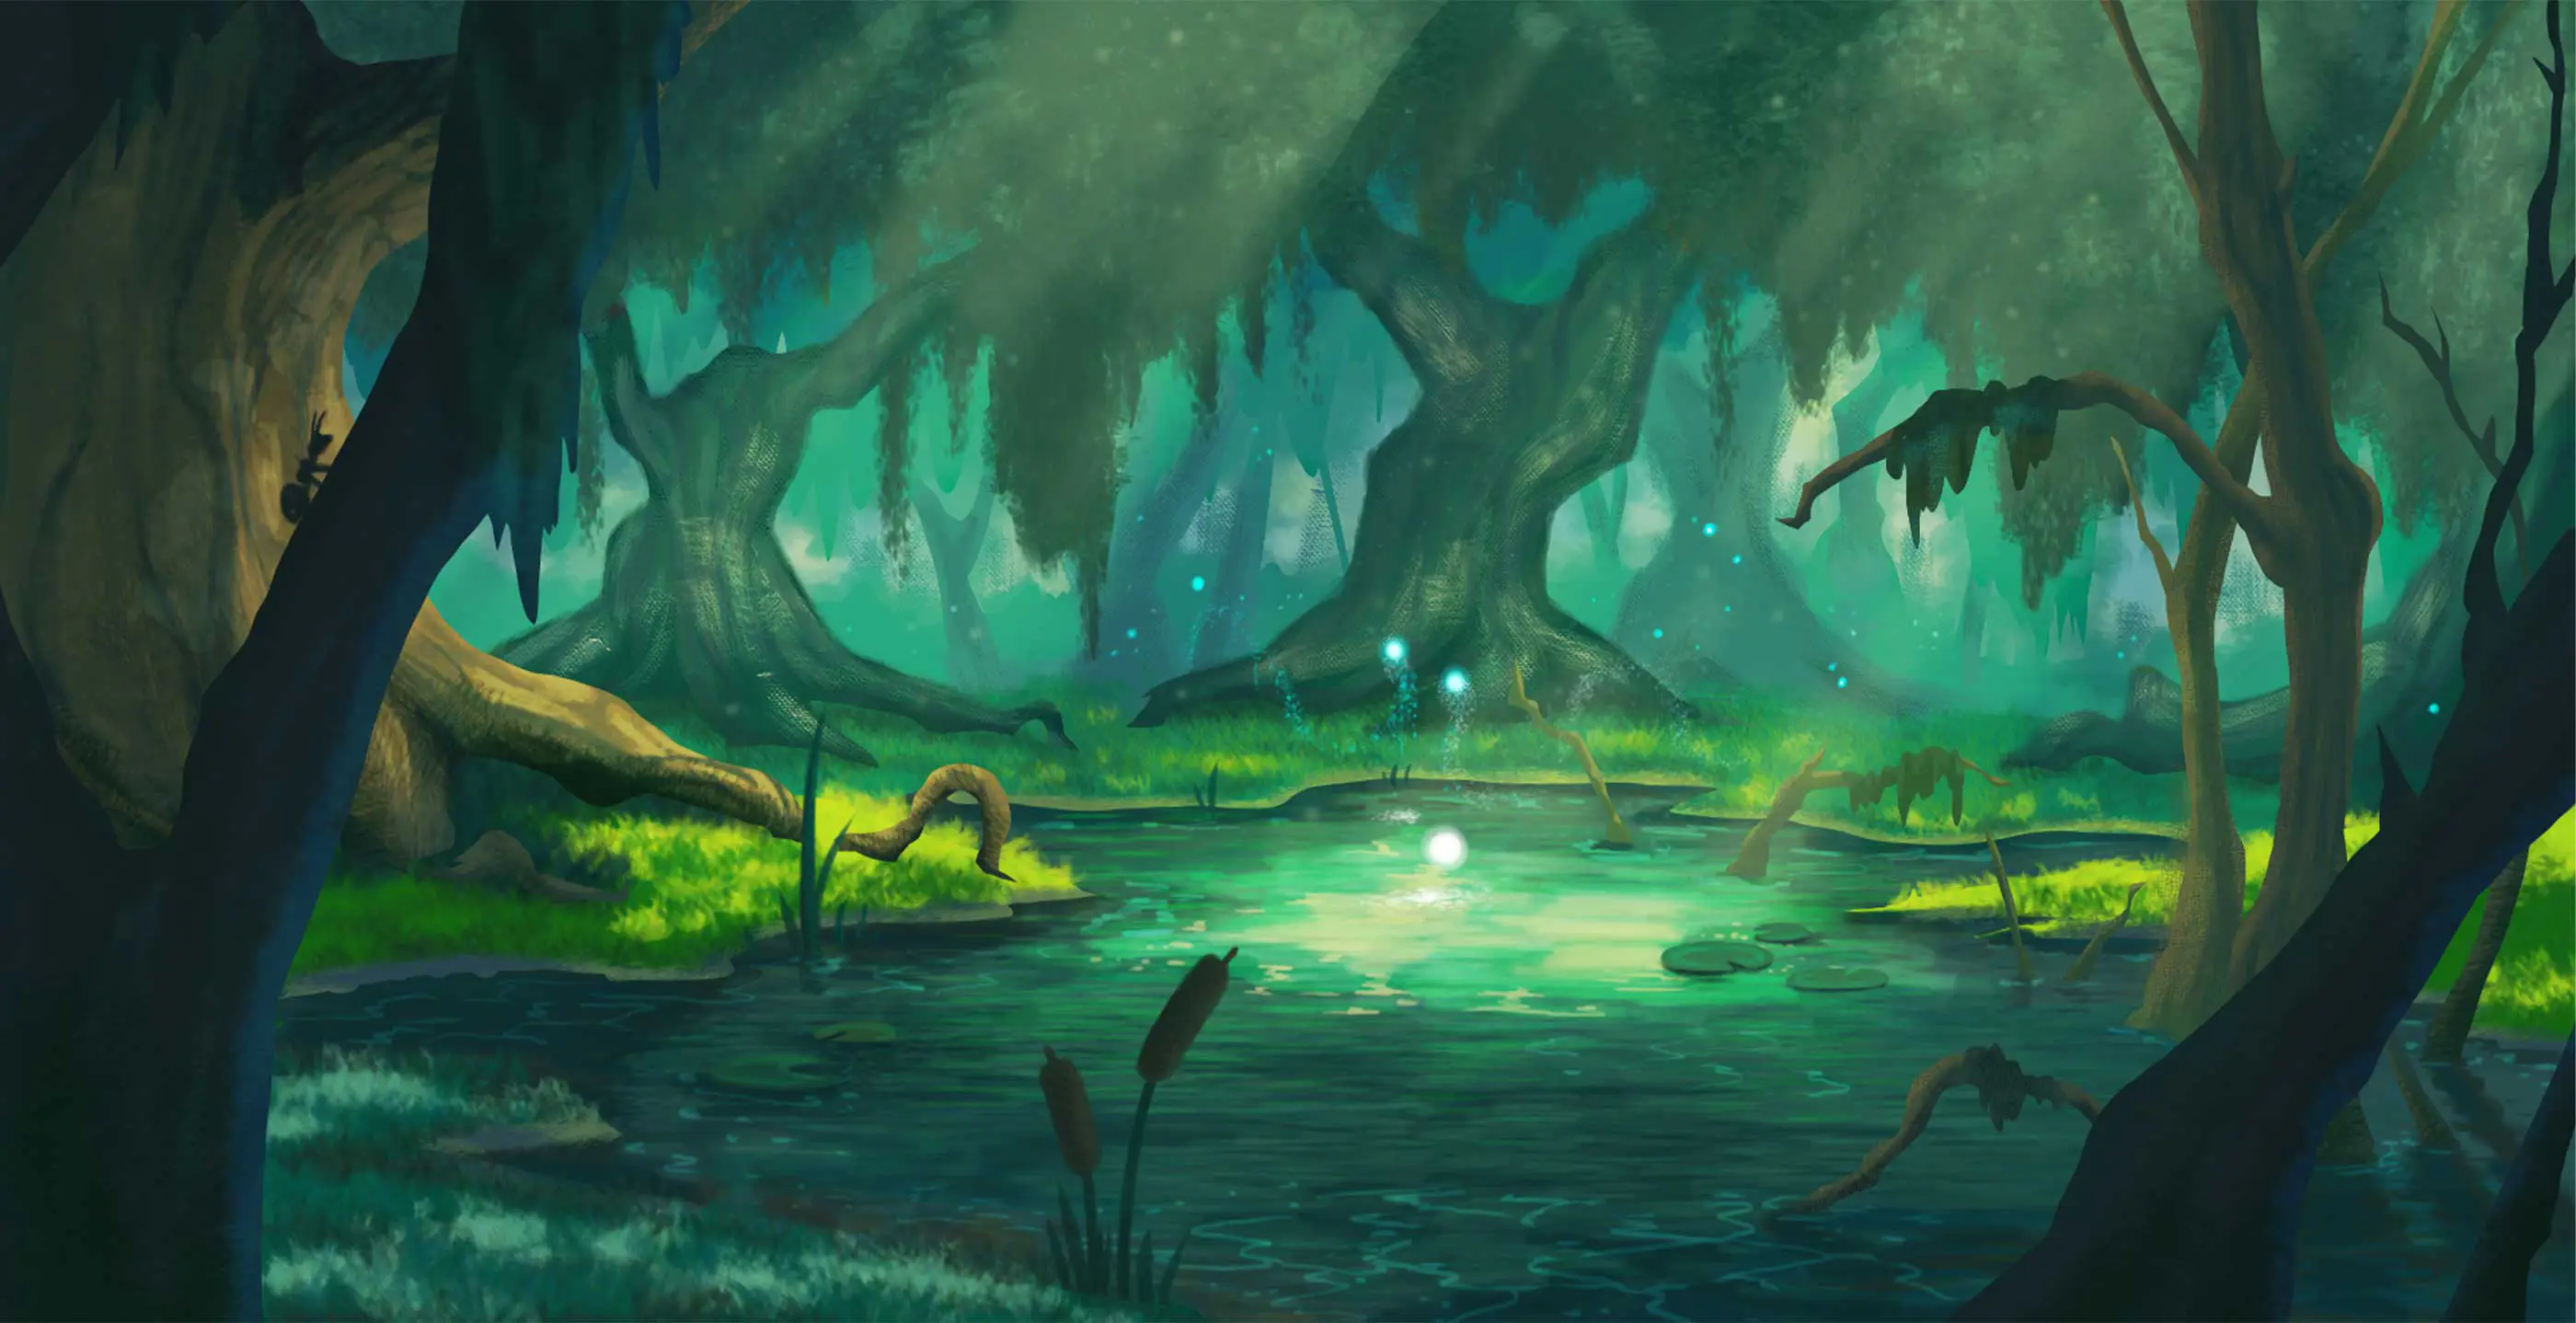 A painting of a swamp.